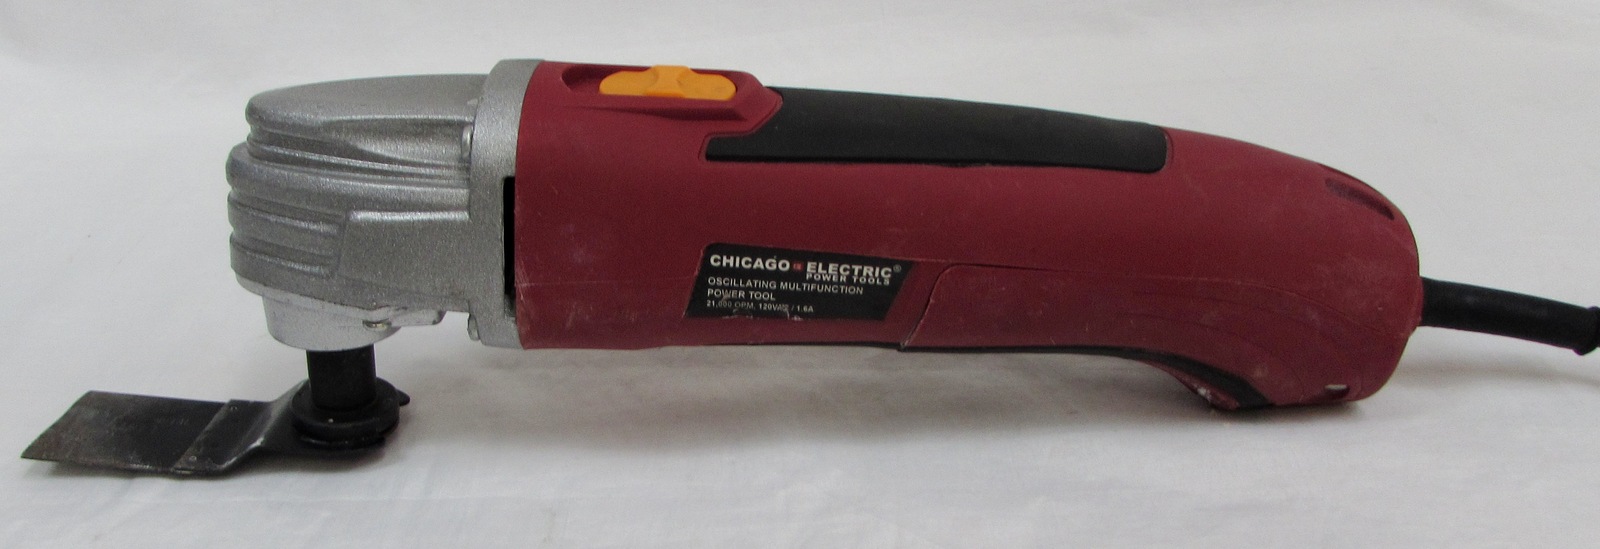 CHICAGO ELECTRIC 62279 OSCILLATING MULTI FUNCTION POWER TOOL - $15.00